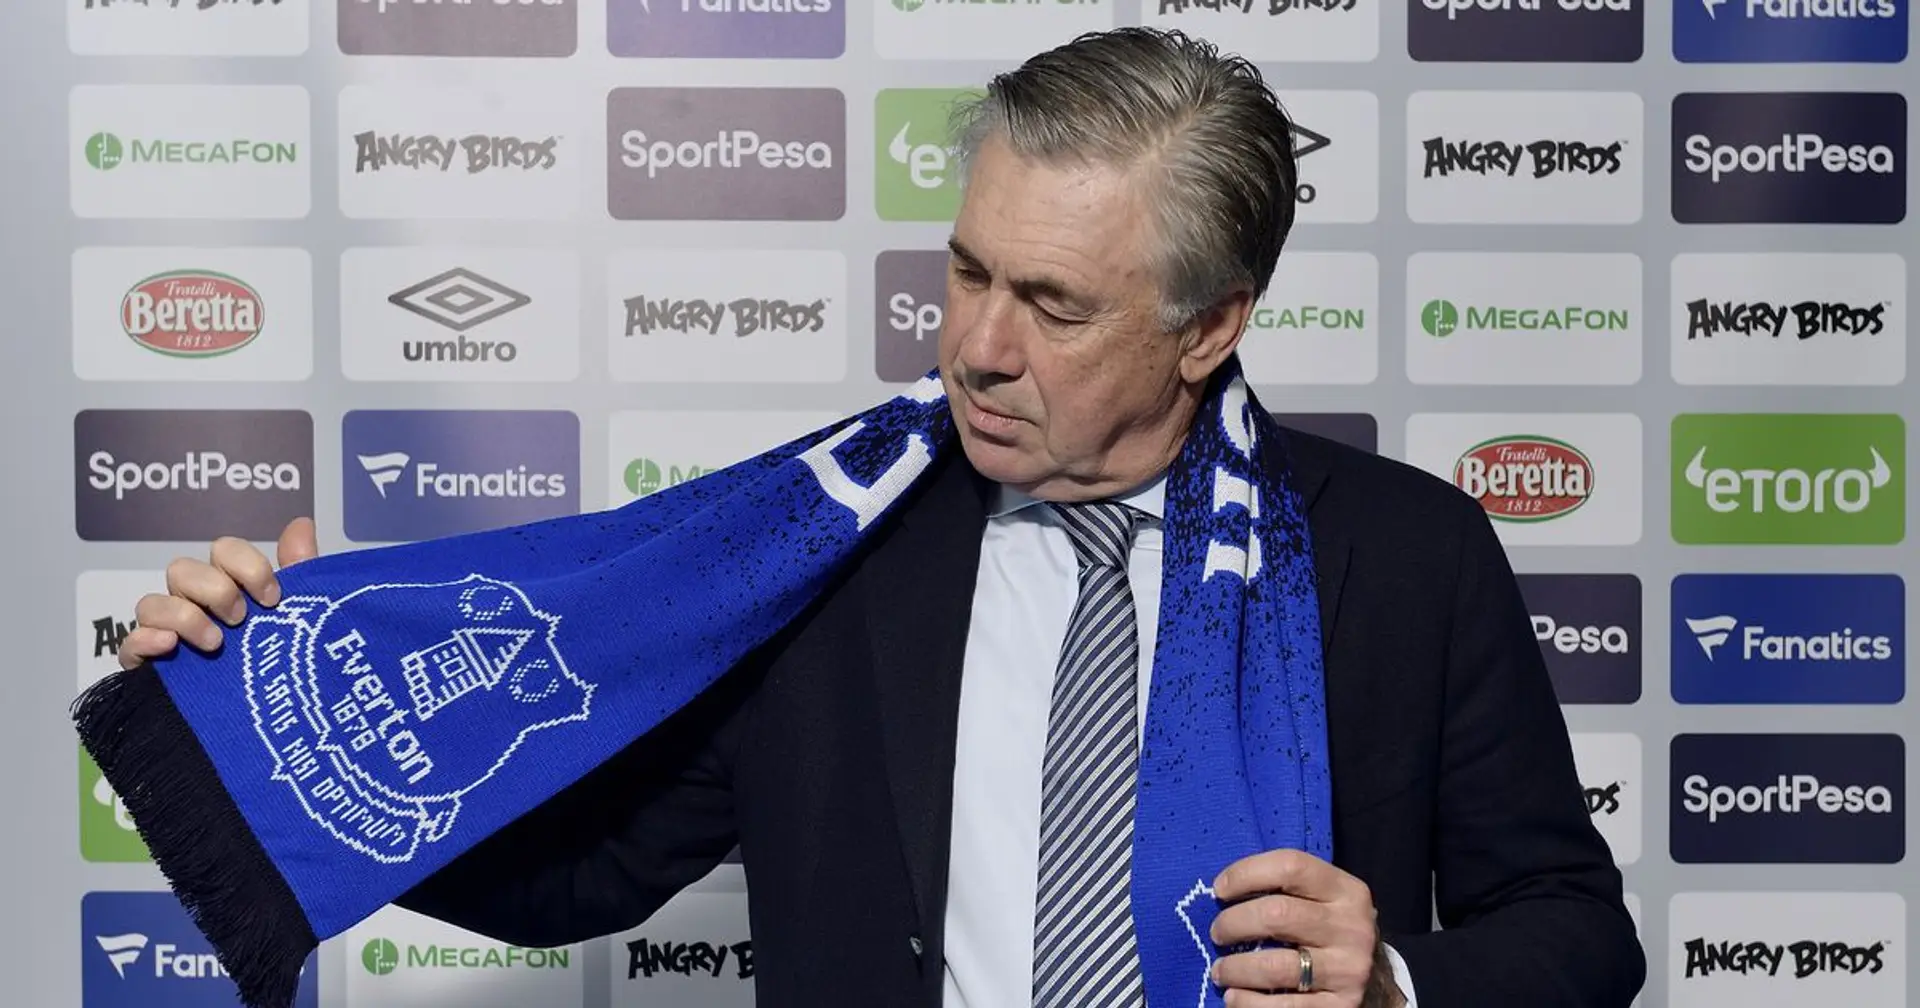 Carlo Ancelotti compares Everton skipper Seamus Coleman to Sergio Ramos: 'He is up there as a captain'